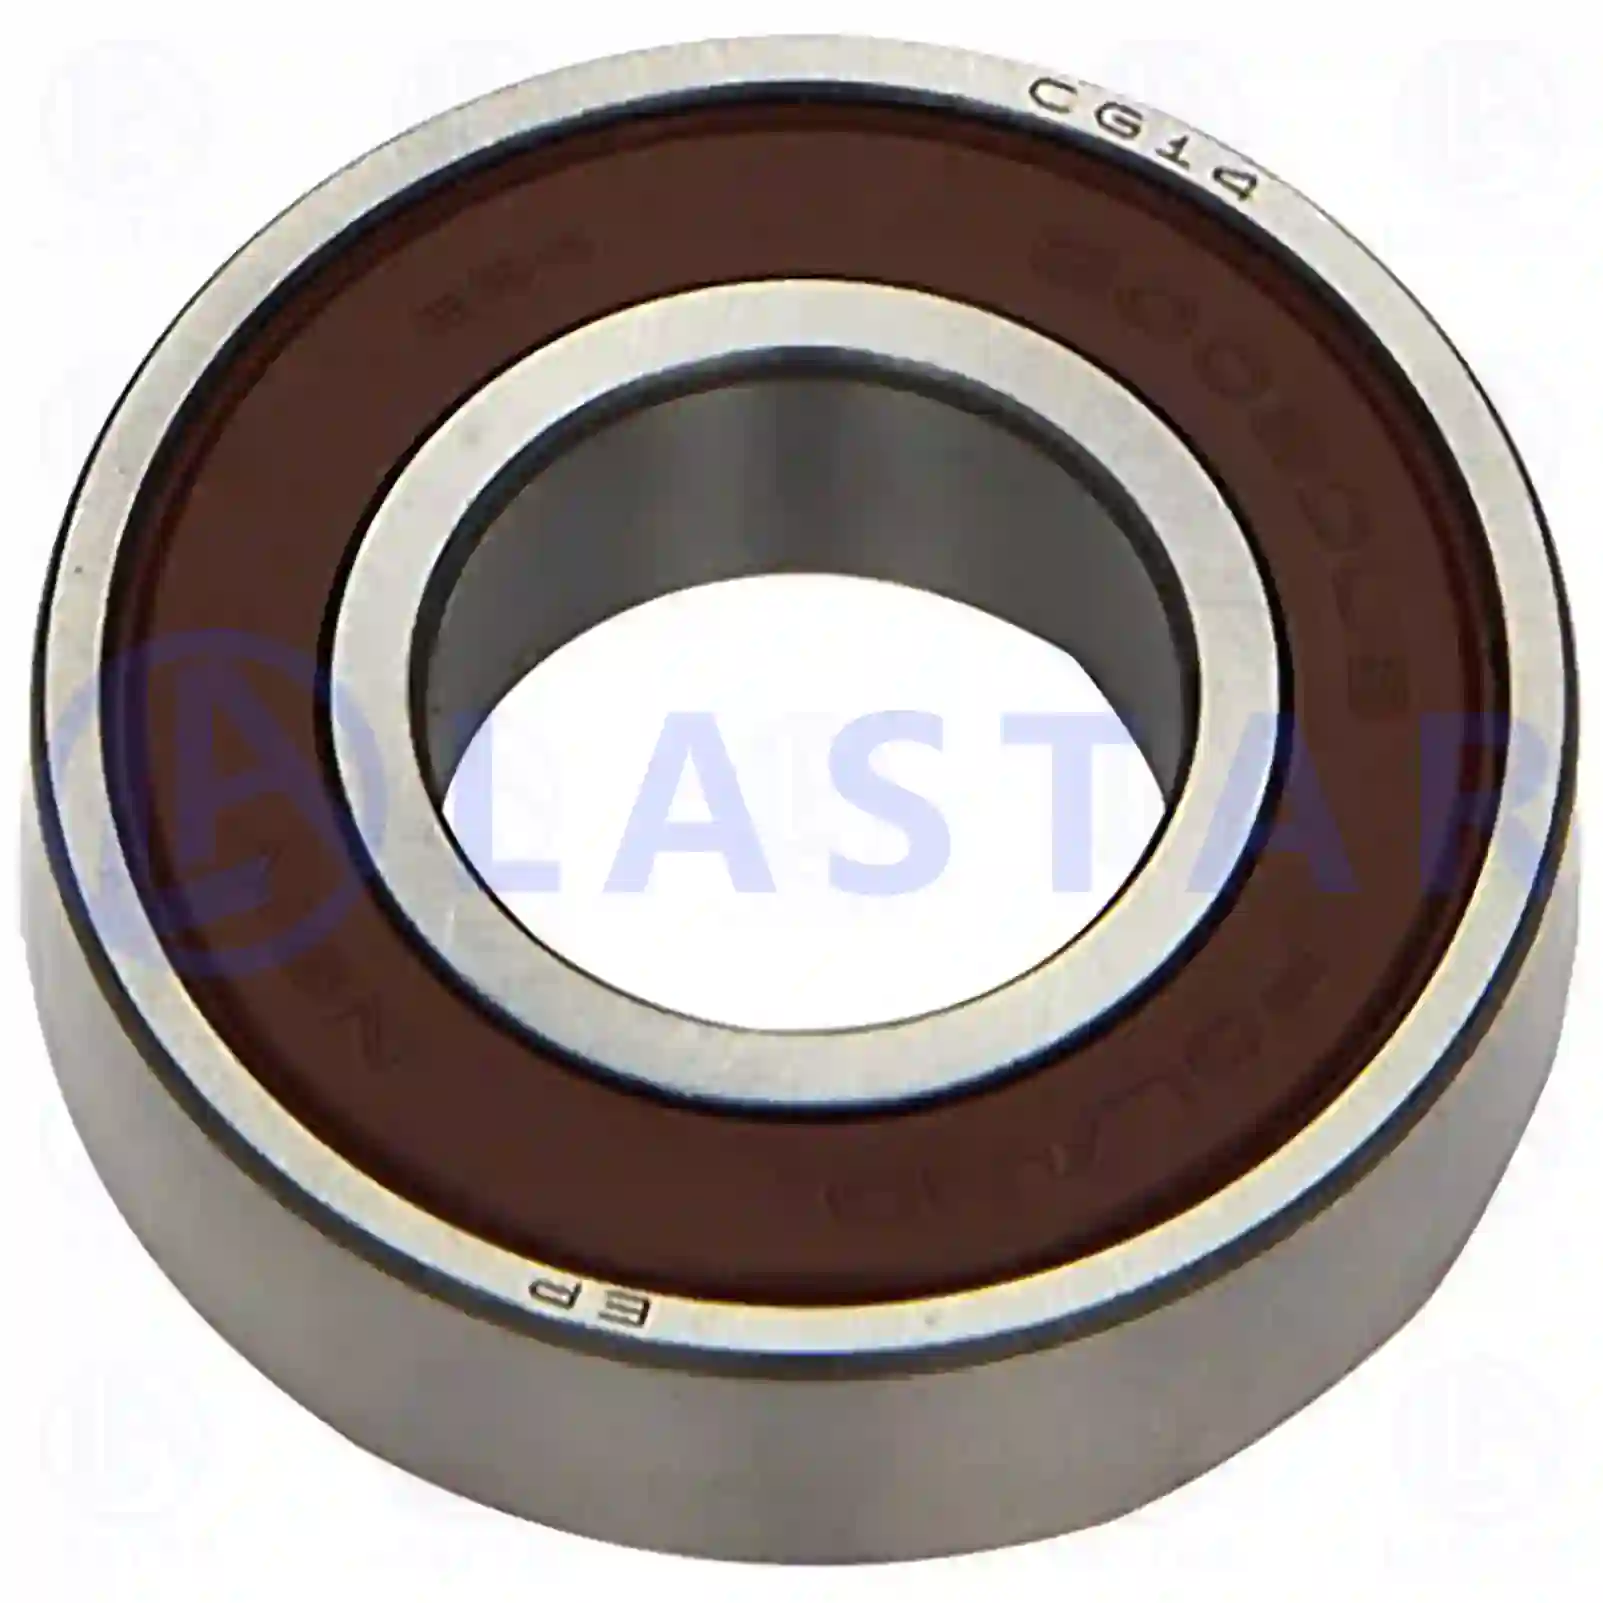 Ball bearing, alternator, 77711610, 2991637, 5725G9, 1450804, 09948483, 09949370, 9117940, 02991637, 51934100138, 0089814025, 0089816925, 0089818625, 23120-69T05, 5725G9, 5001850082, 5001850105, 7701047244, 7701048233, 9117940, 038903221A ||  77711610 Lastar Spare Part | Truck Spare Parts, Auotomotive Spare Parts Ball bearing, alternator, 77711610, 2991637, 5725G9, 1450804, 09948483, 09949370, 9117940, 02991637, 51934100138, 0089814025, 0089816925, 0089818625, 23120-69T05, 5725G9, 5001850082, 5001850105, 7701047244, 7701048233, 9117940, 038903221A ||  77711610 Lastar Spare Part | Truck Spare Parts, Auotomotive Spare Parts